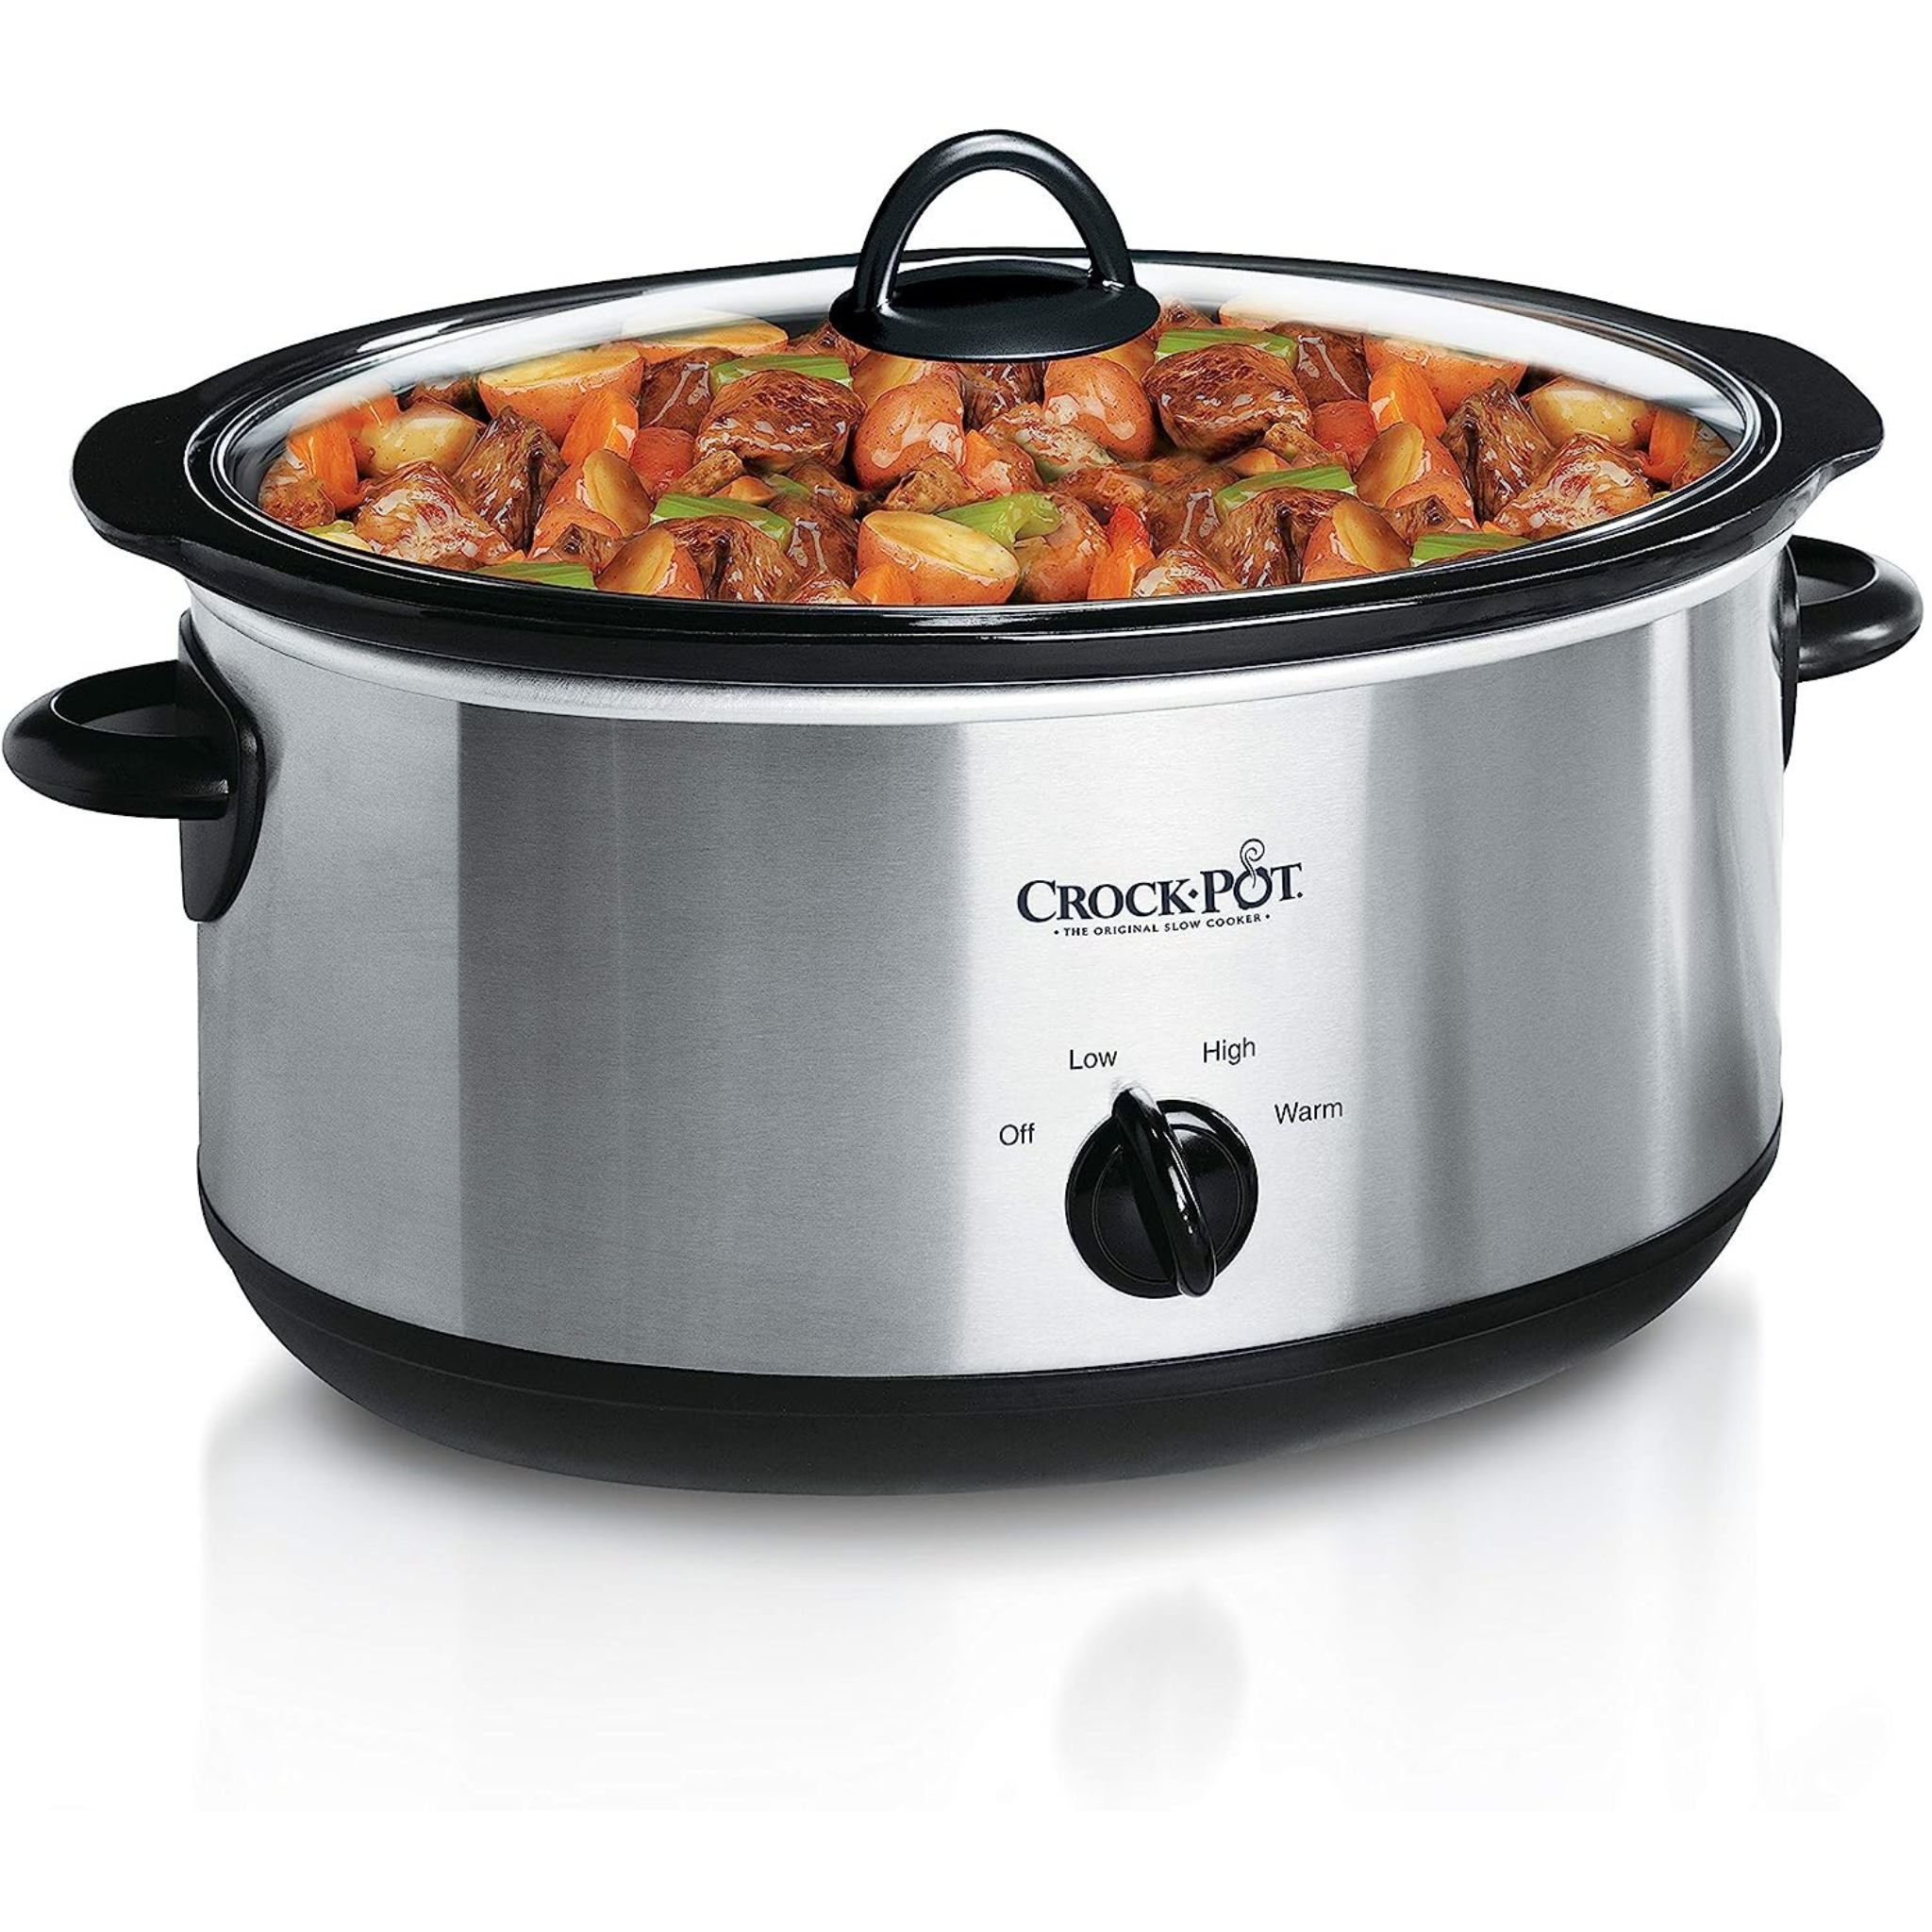 Crock-Pot 7-Quart Stainless Steel Oval Manual Slow Cooker